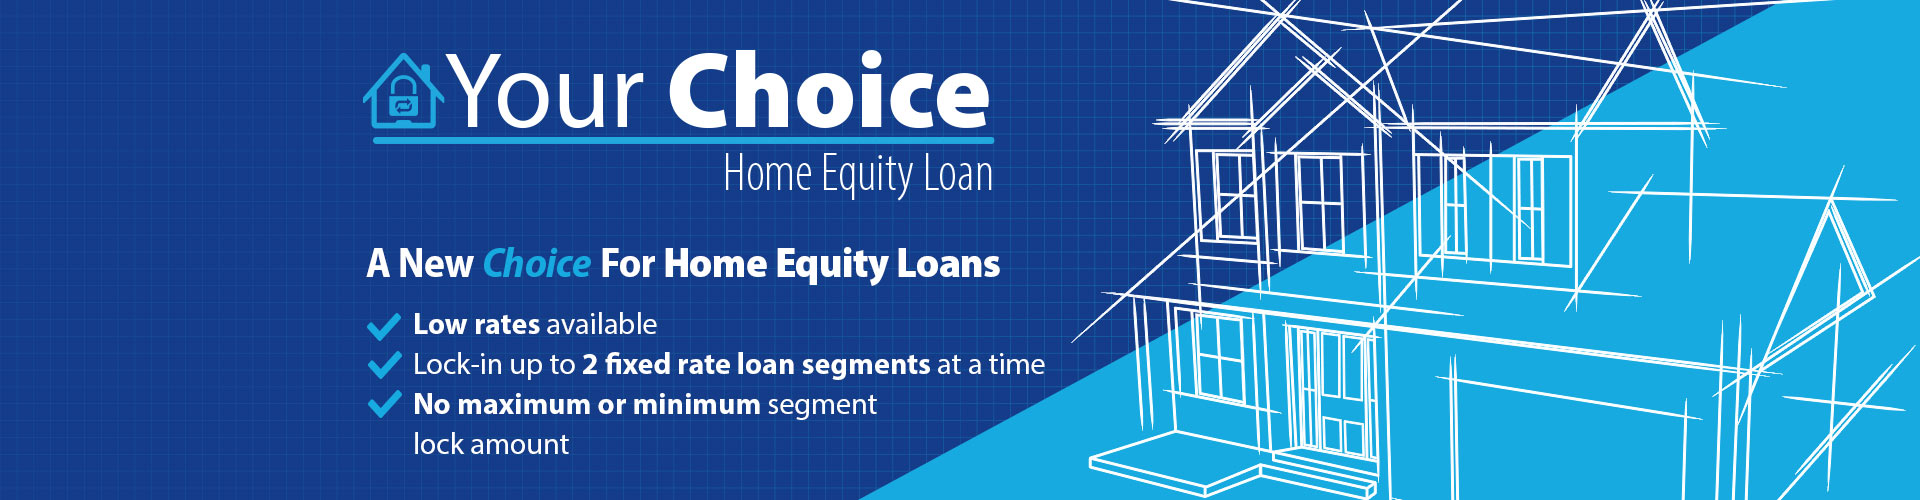 Your Choice Home Equity Loan